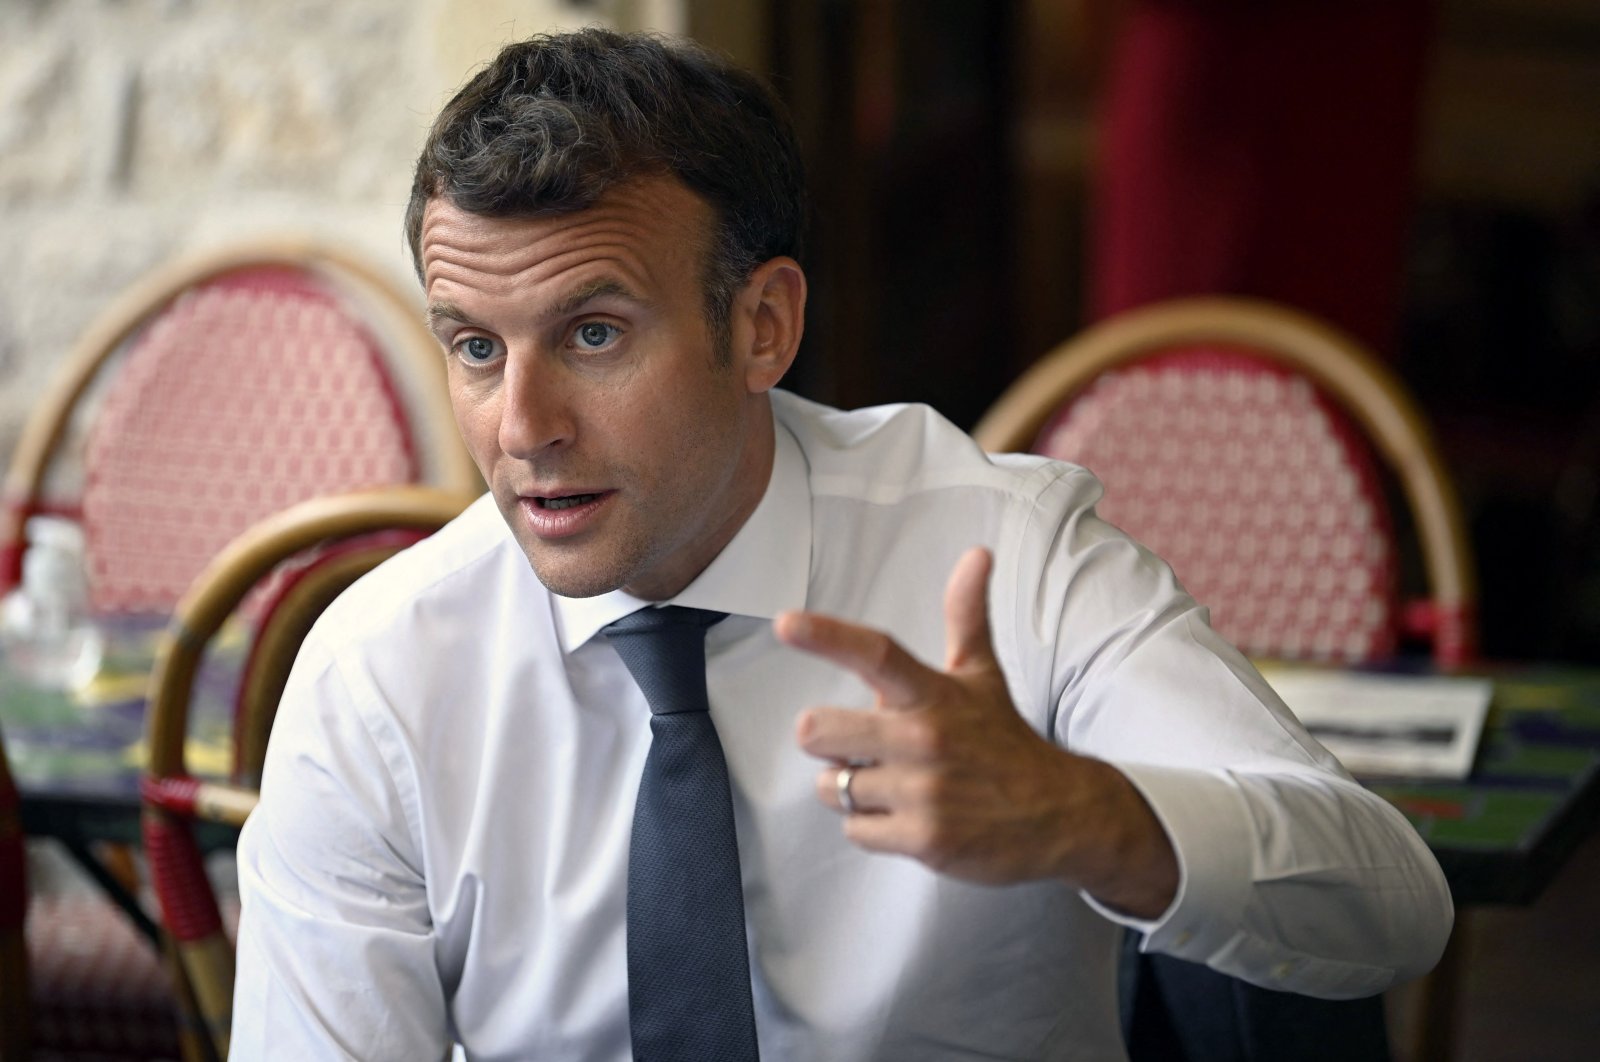 French President Emmanuel Macron speaks and gestures in a cafe during a visit in Saint-Cirq-Lapopie, near Cahors, southwestern France, June 2, 2021. (AFP Photo)